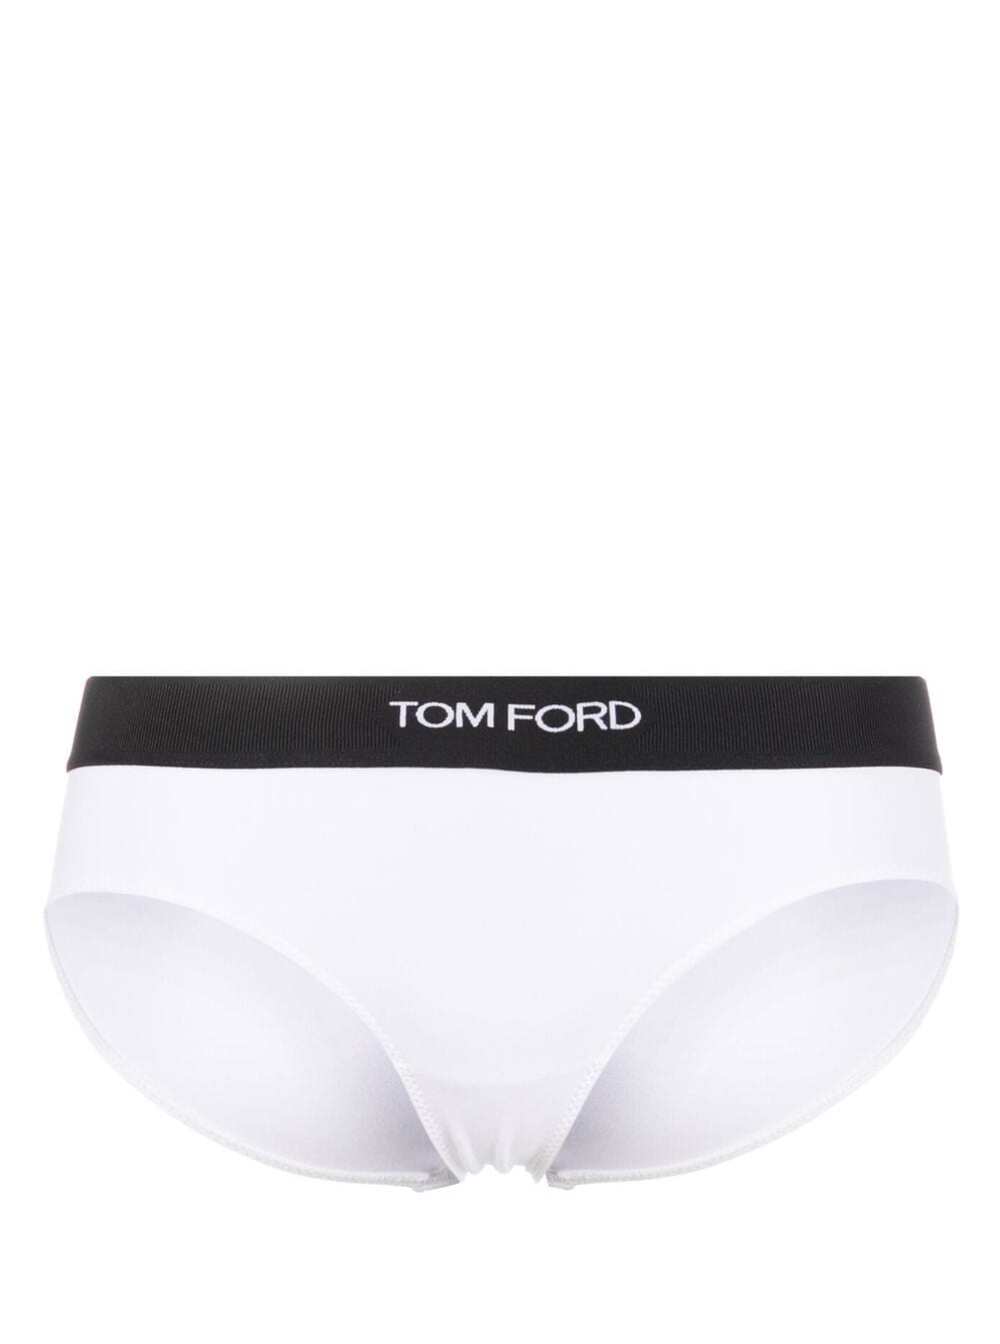 TOM FORD SIGNATURE BOY SHORT WHITE BRIEF WITH LOGO WAISTBAND IN STRETCH-JERSEY WOMAN